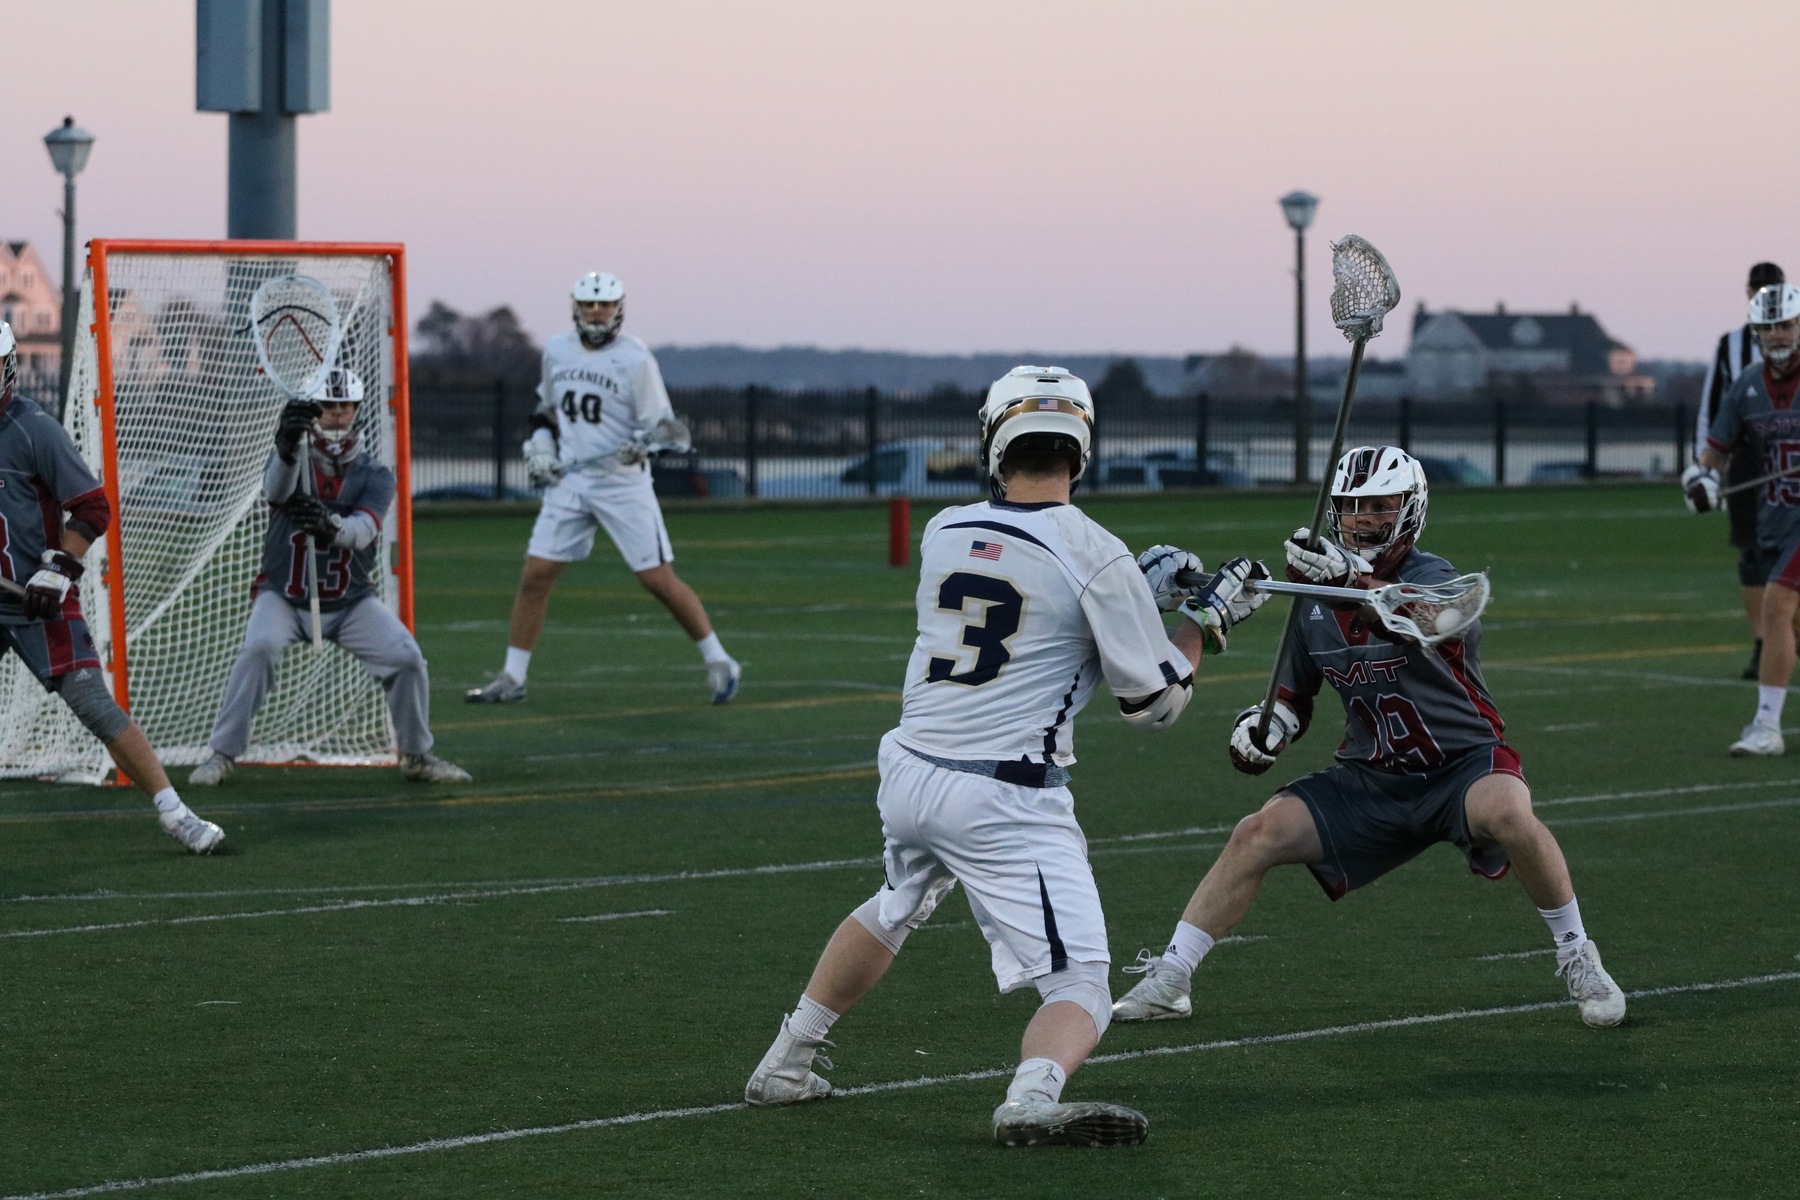 Avakian Records 100th Career Point as Buccaneers Ground the Falcons